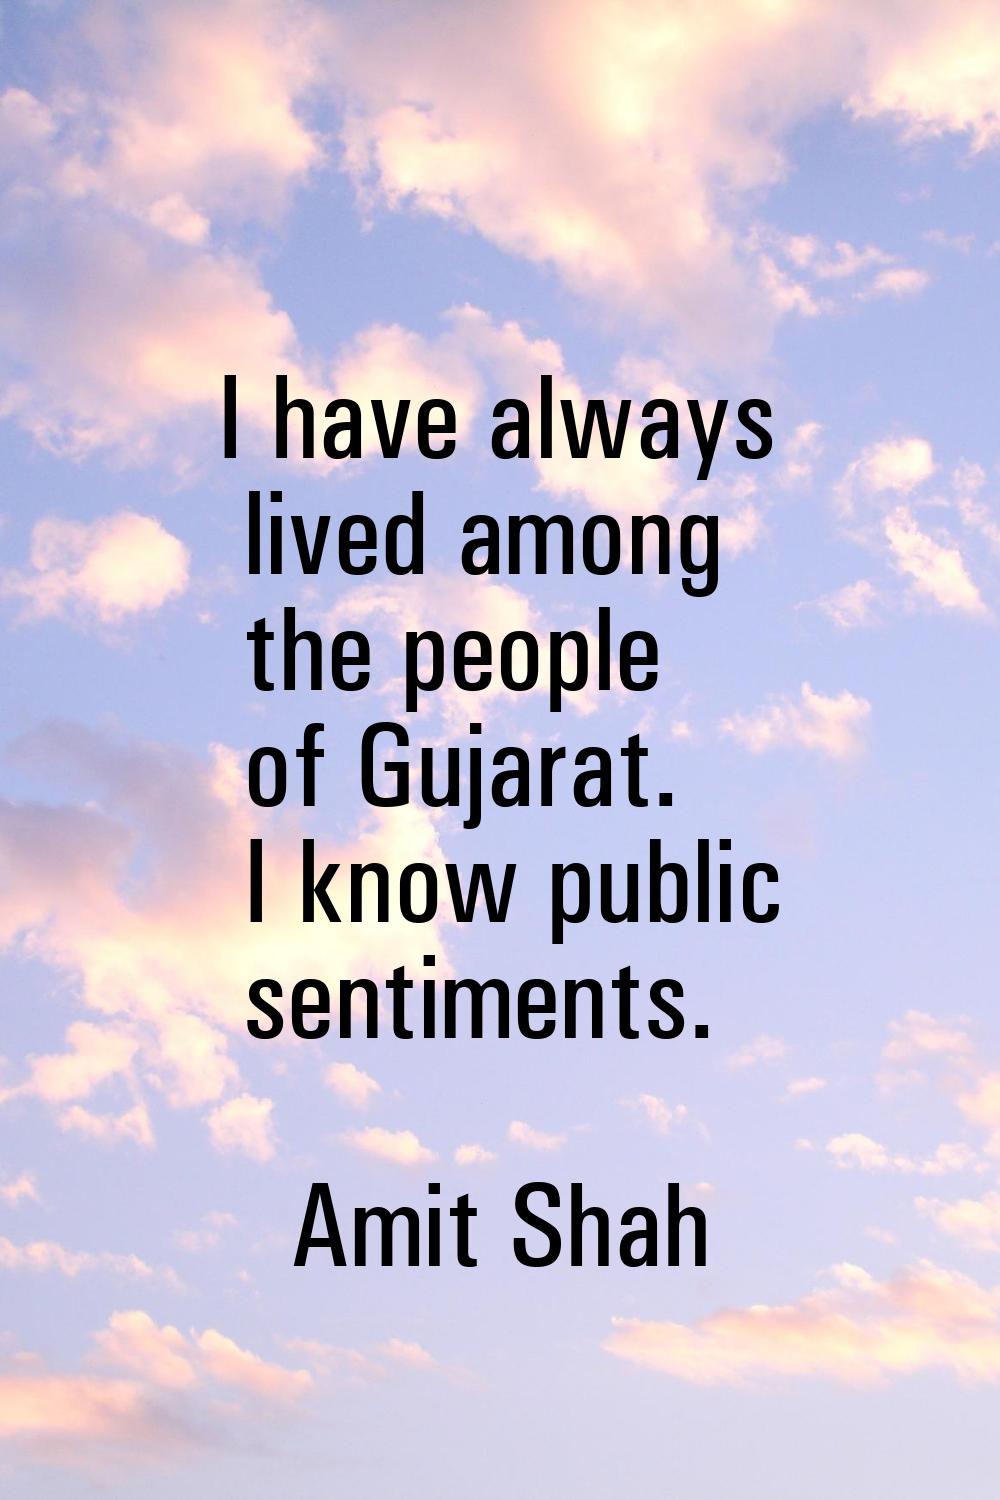 I have always lived among the people of Gujarat. I know public sentiments.